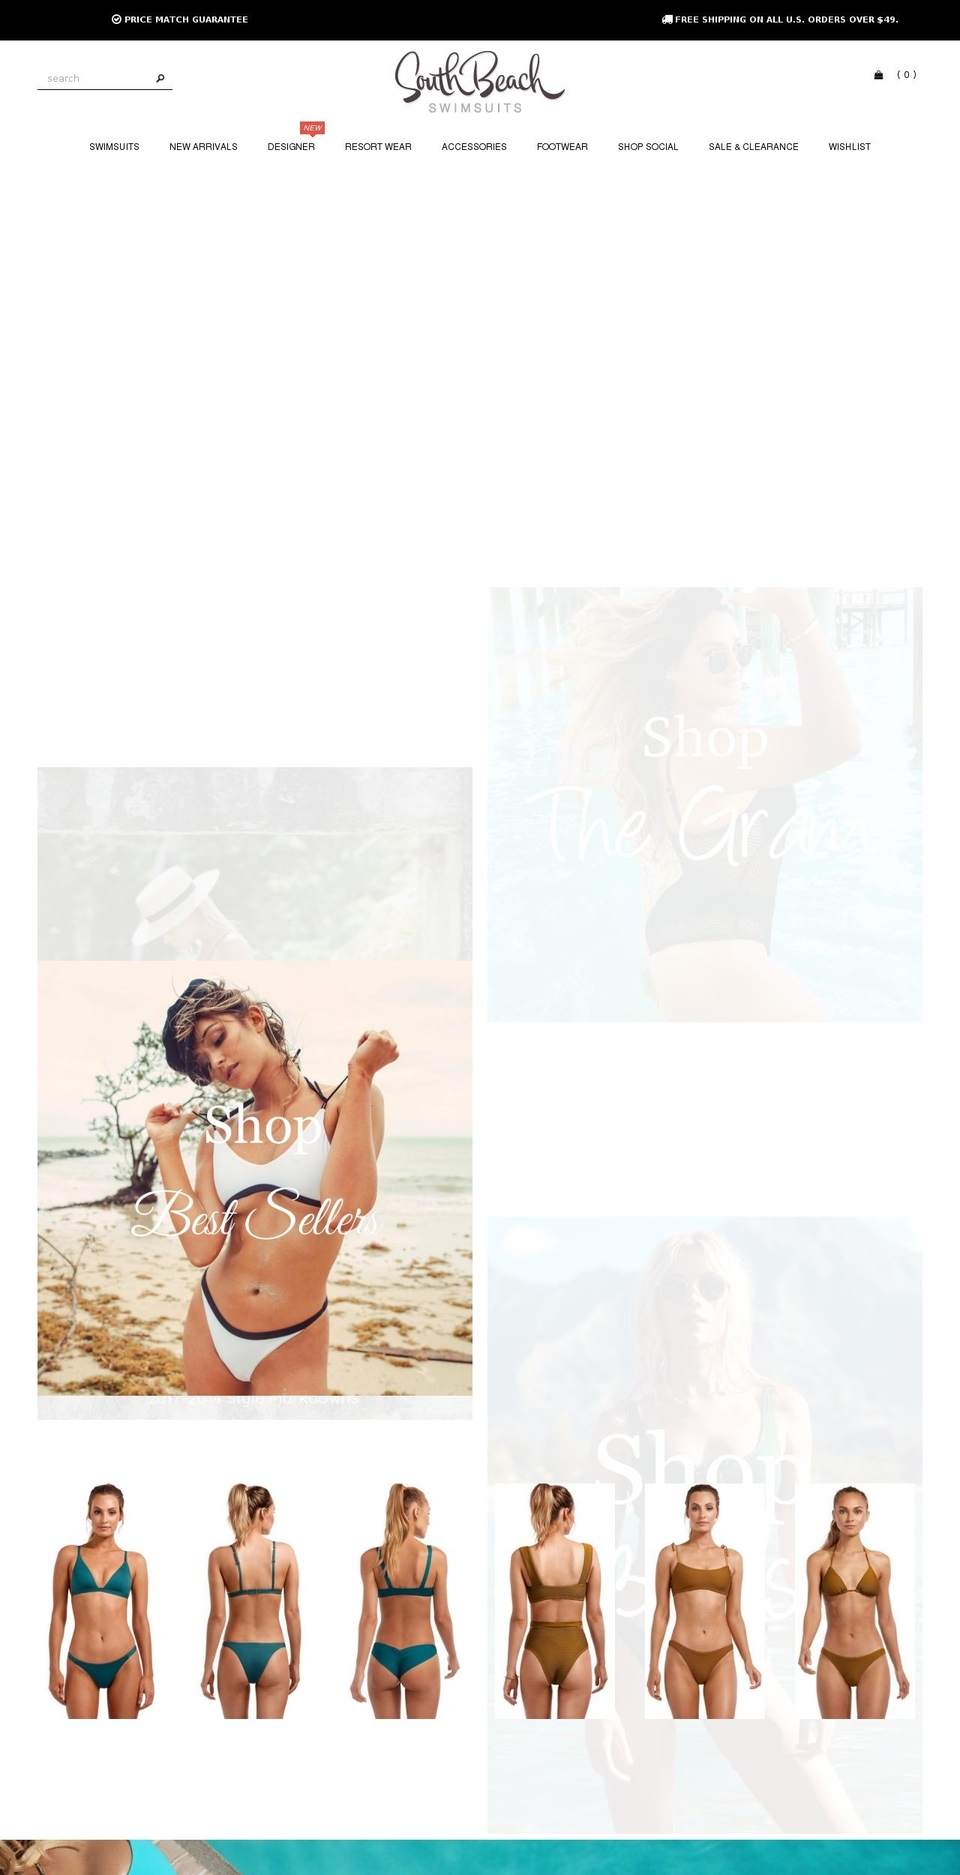 Made With ❤ By Minion Made - Updated Checkout Shopify theme site example southbeachswimsuits.boutique